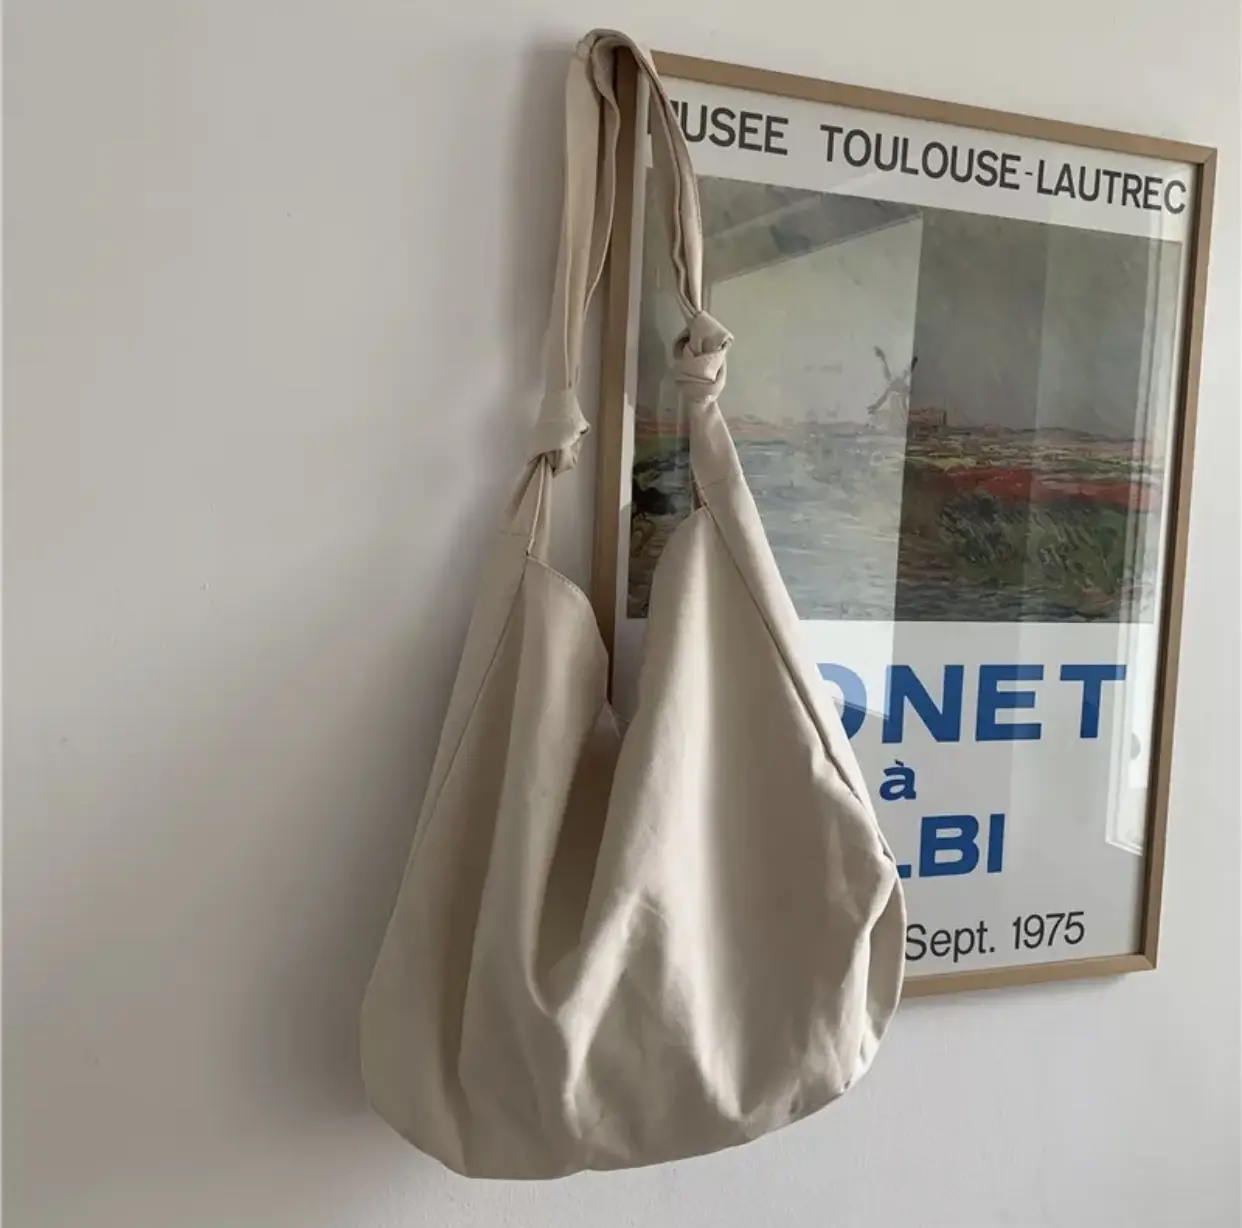 L.L. Bean Boat & Tote Sizing, Gallery posted by Allie Hoffberg